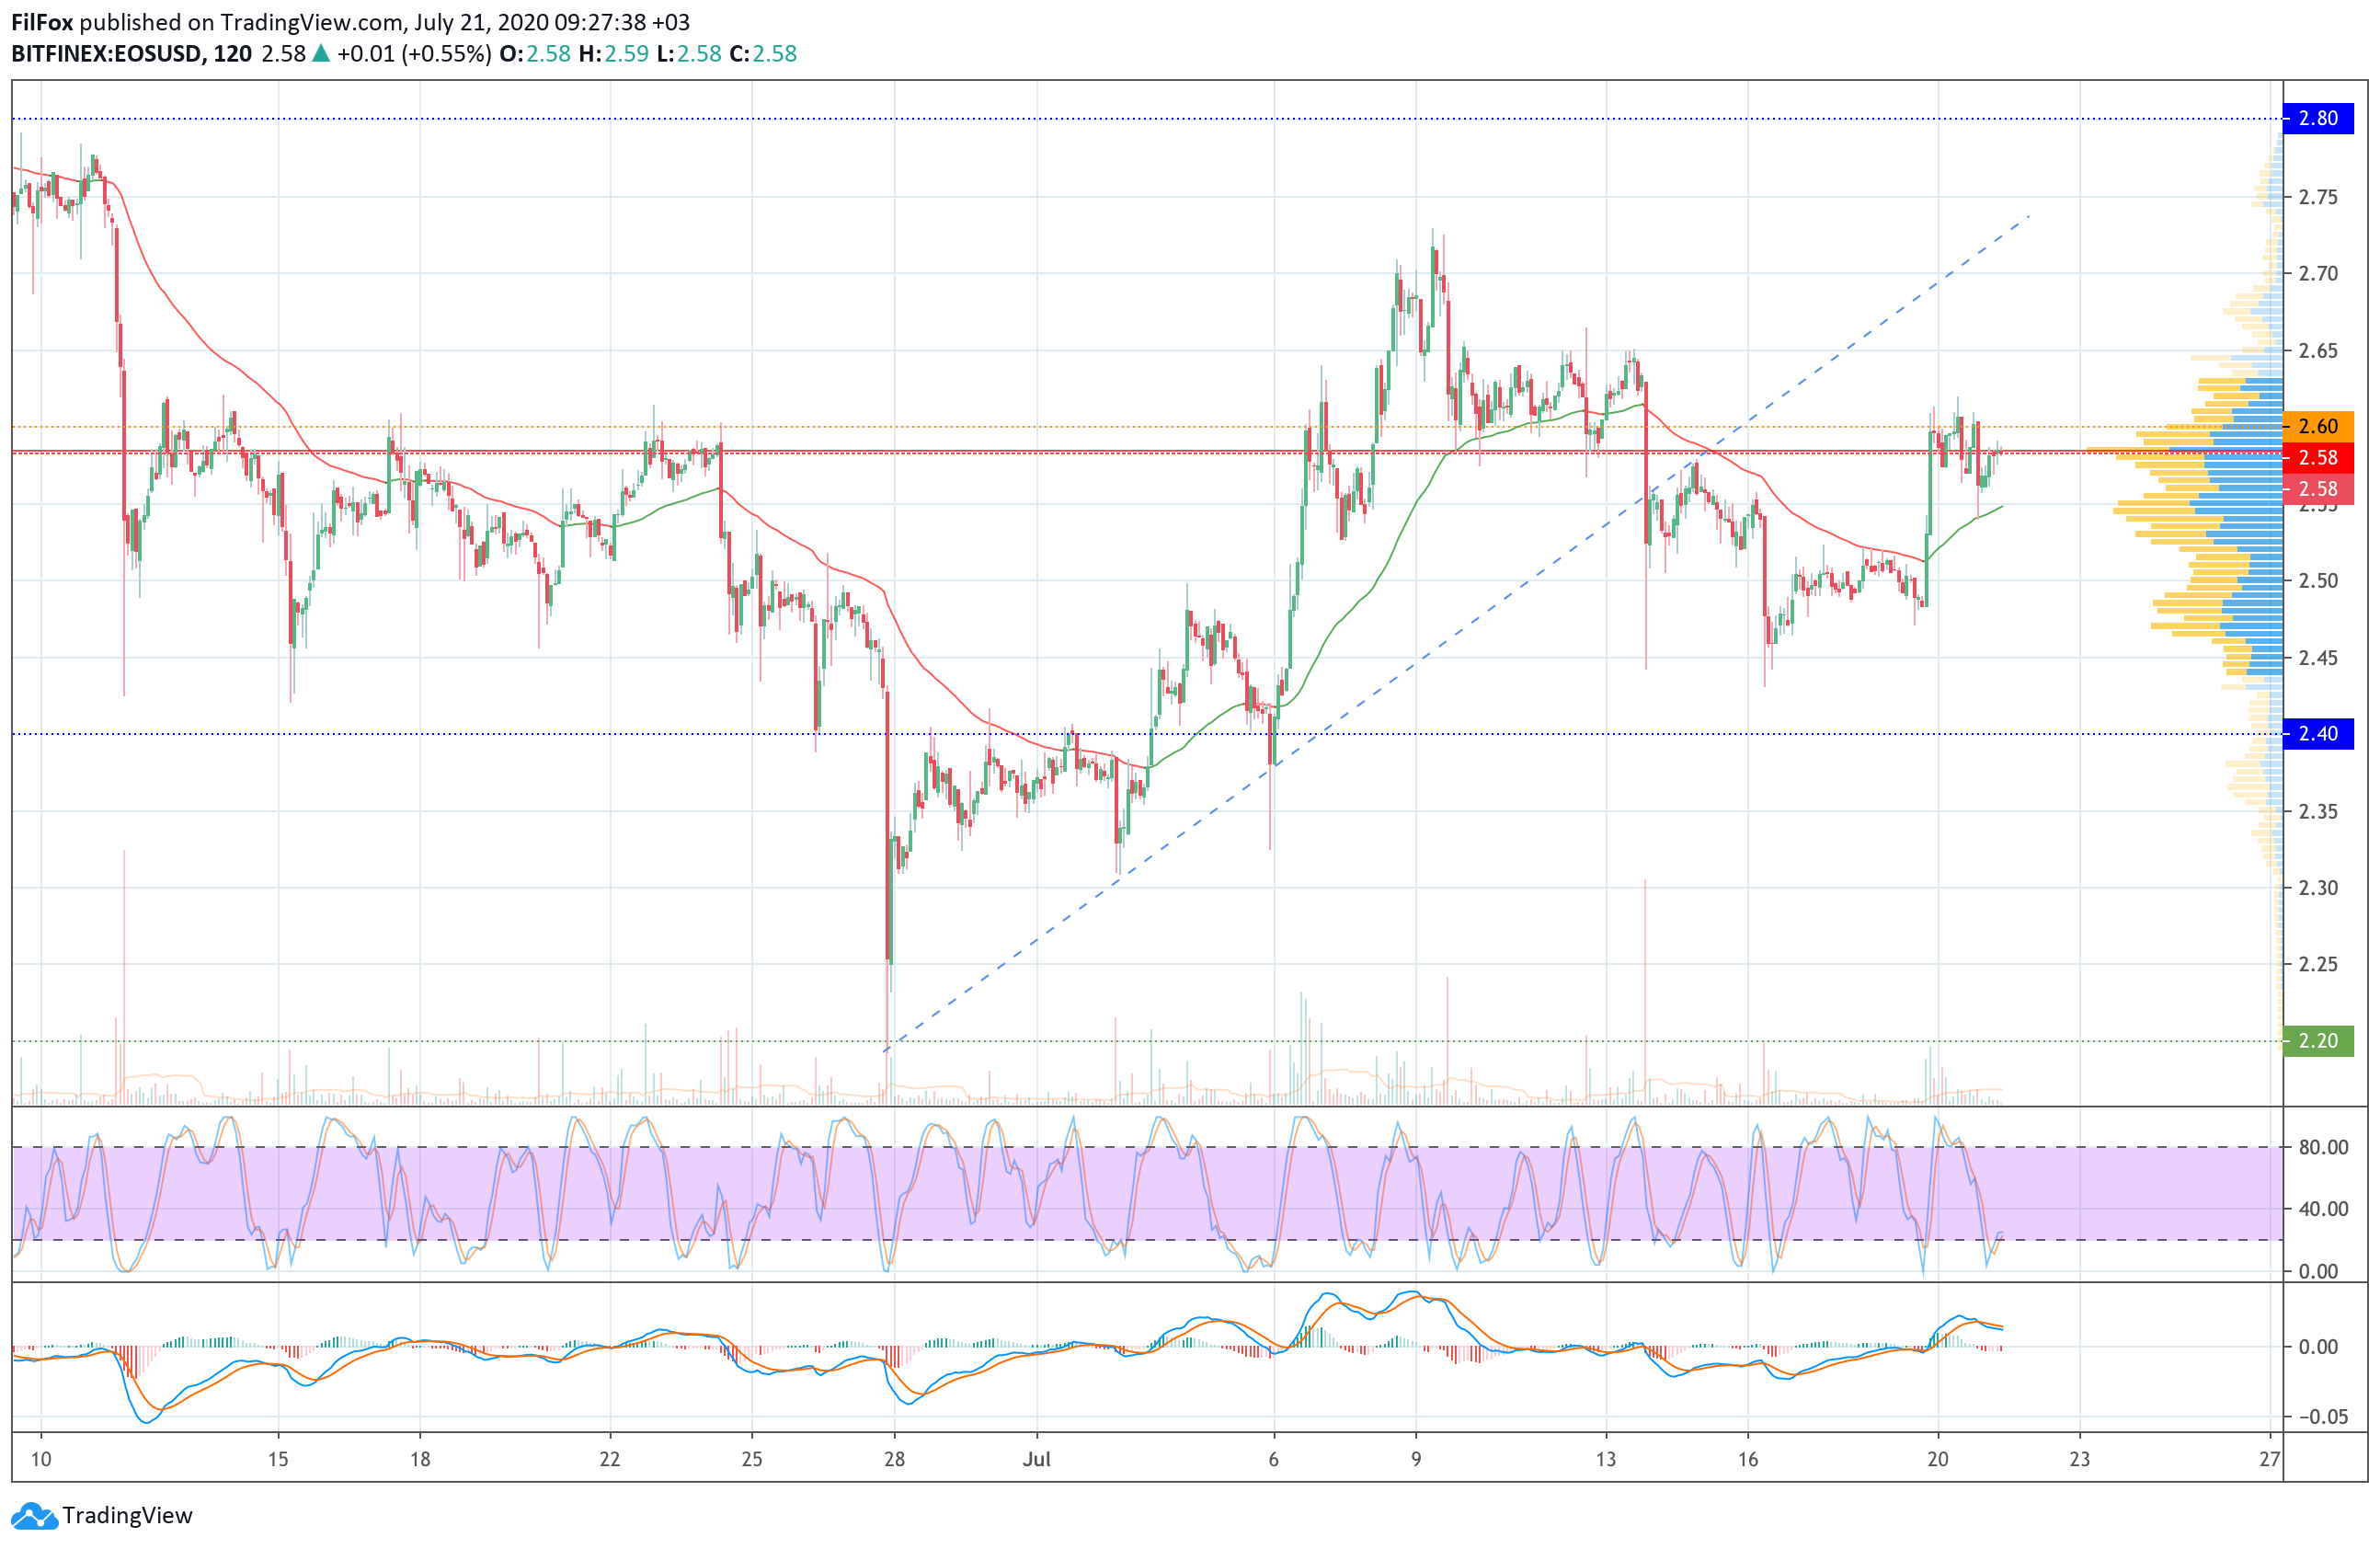 Analysis of the prices of Bitcoin Cash, Cardano, Litecoin, EOS and Stellar for 07/21/2020